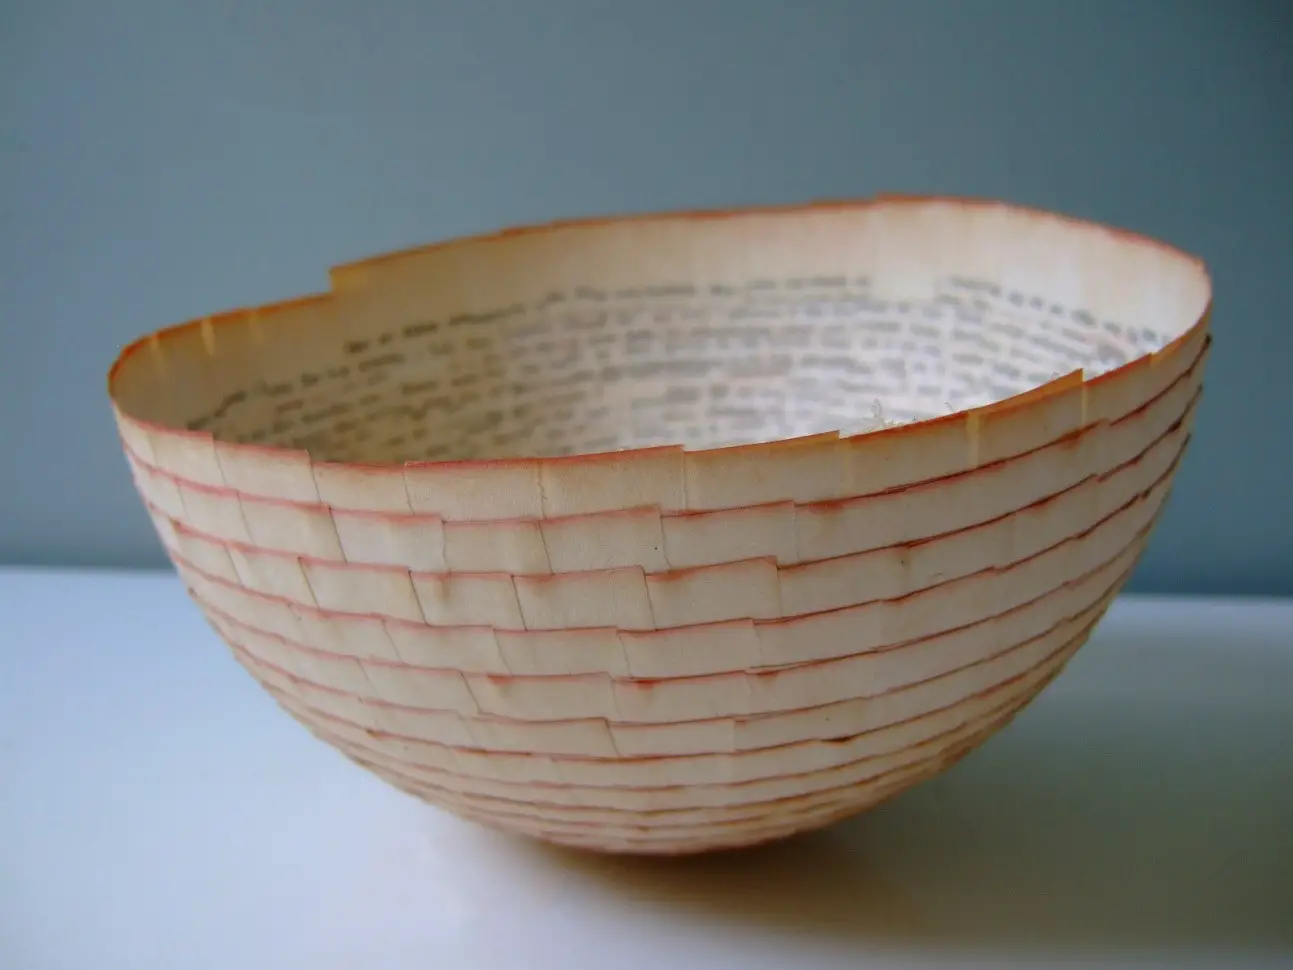 How to use Newspaper to make prints on pottery